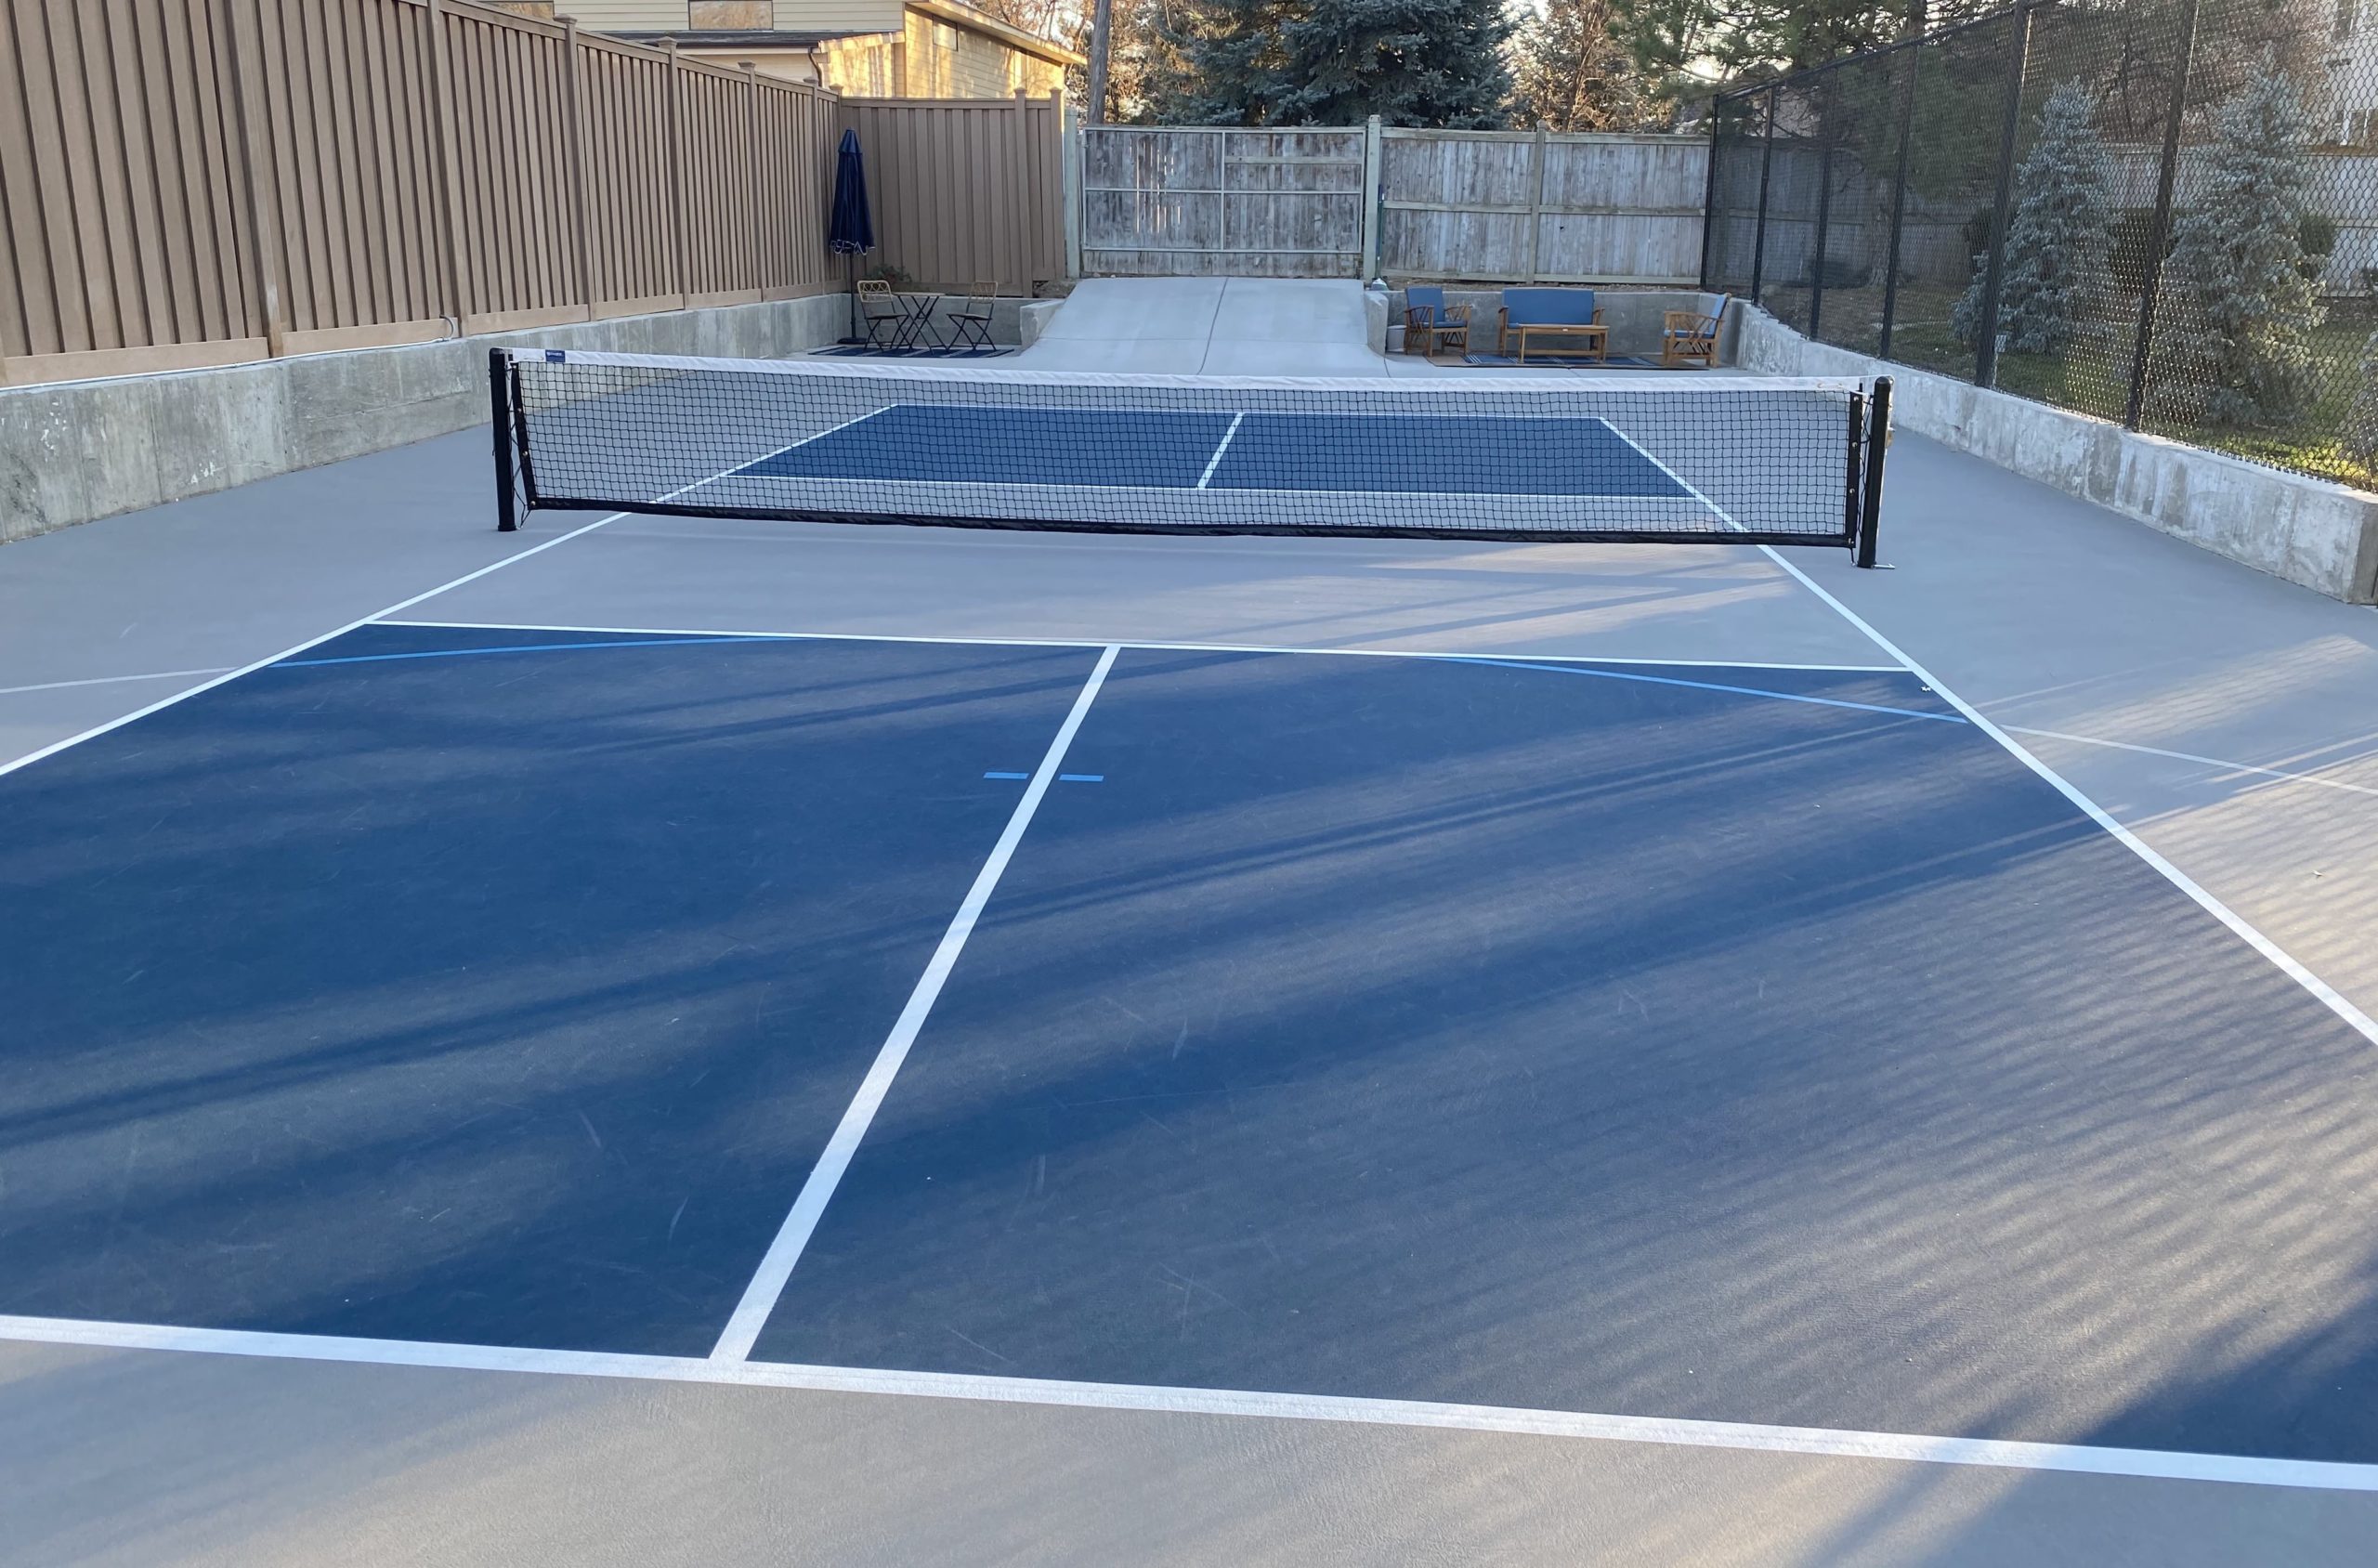 The Best Pickleball Courts • Pickleball Court Experts